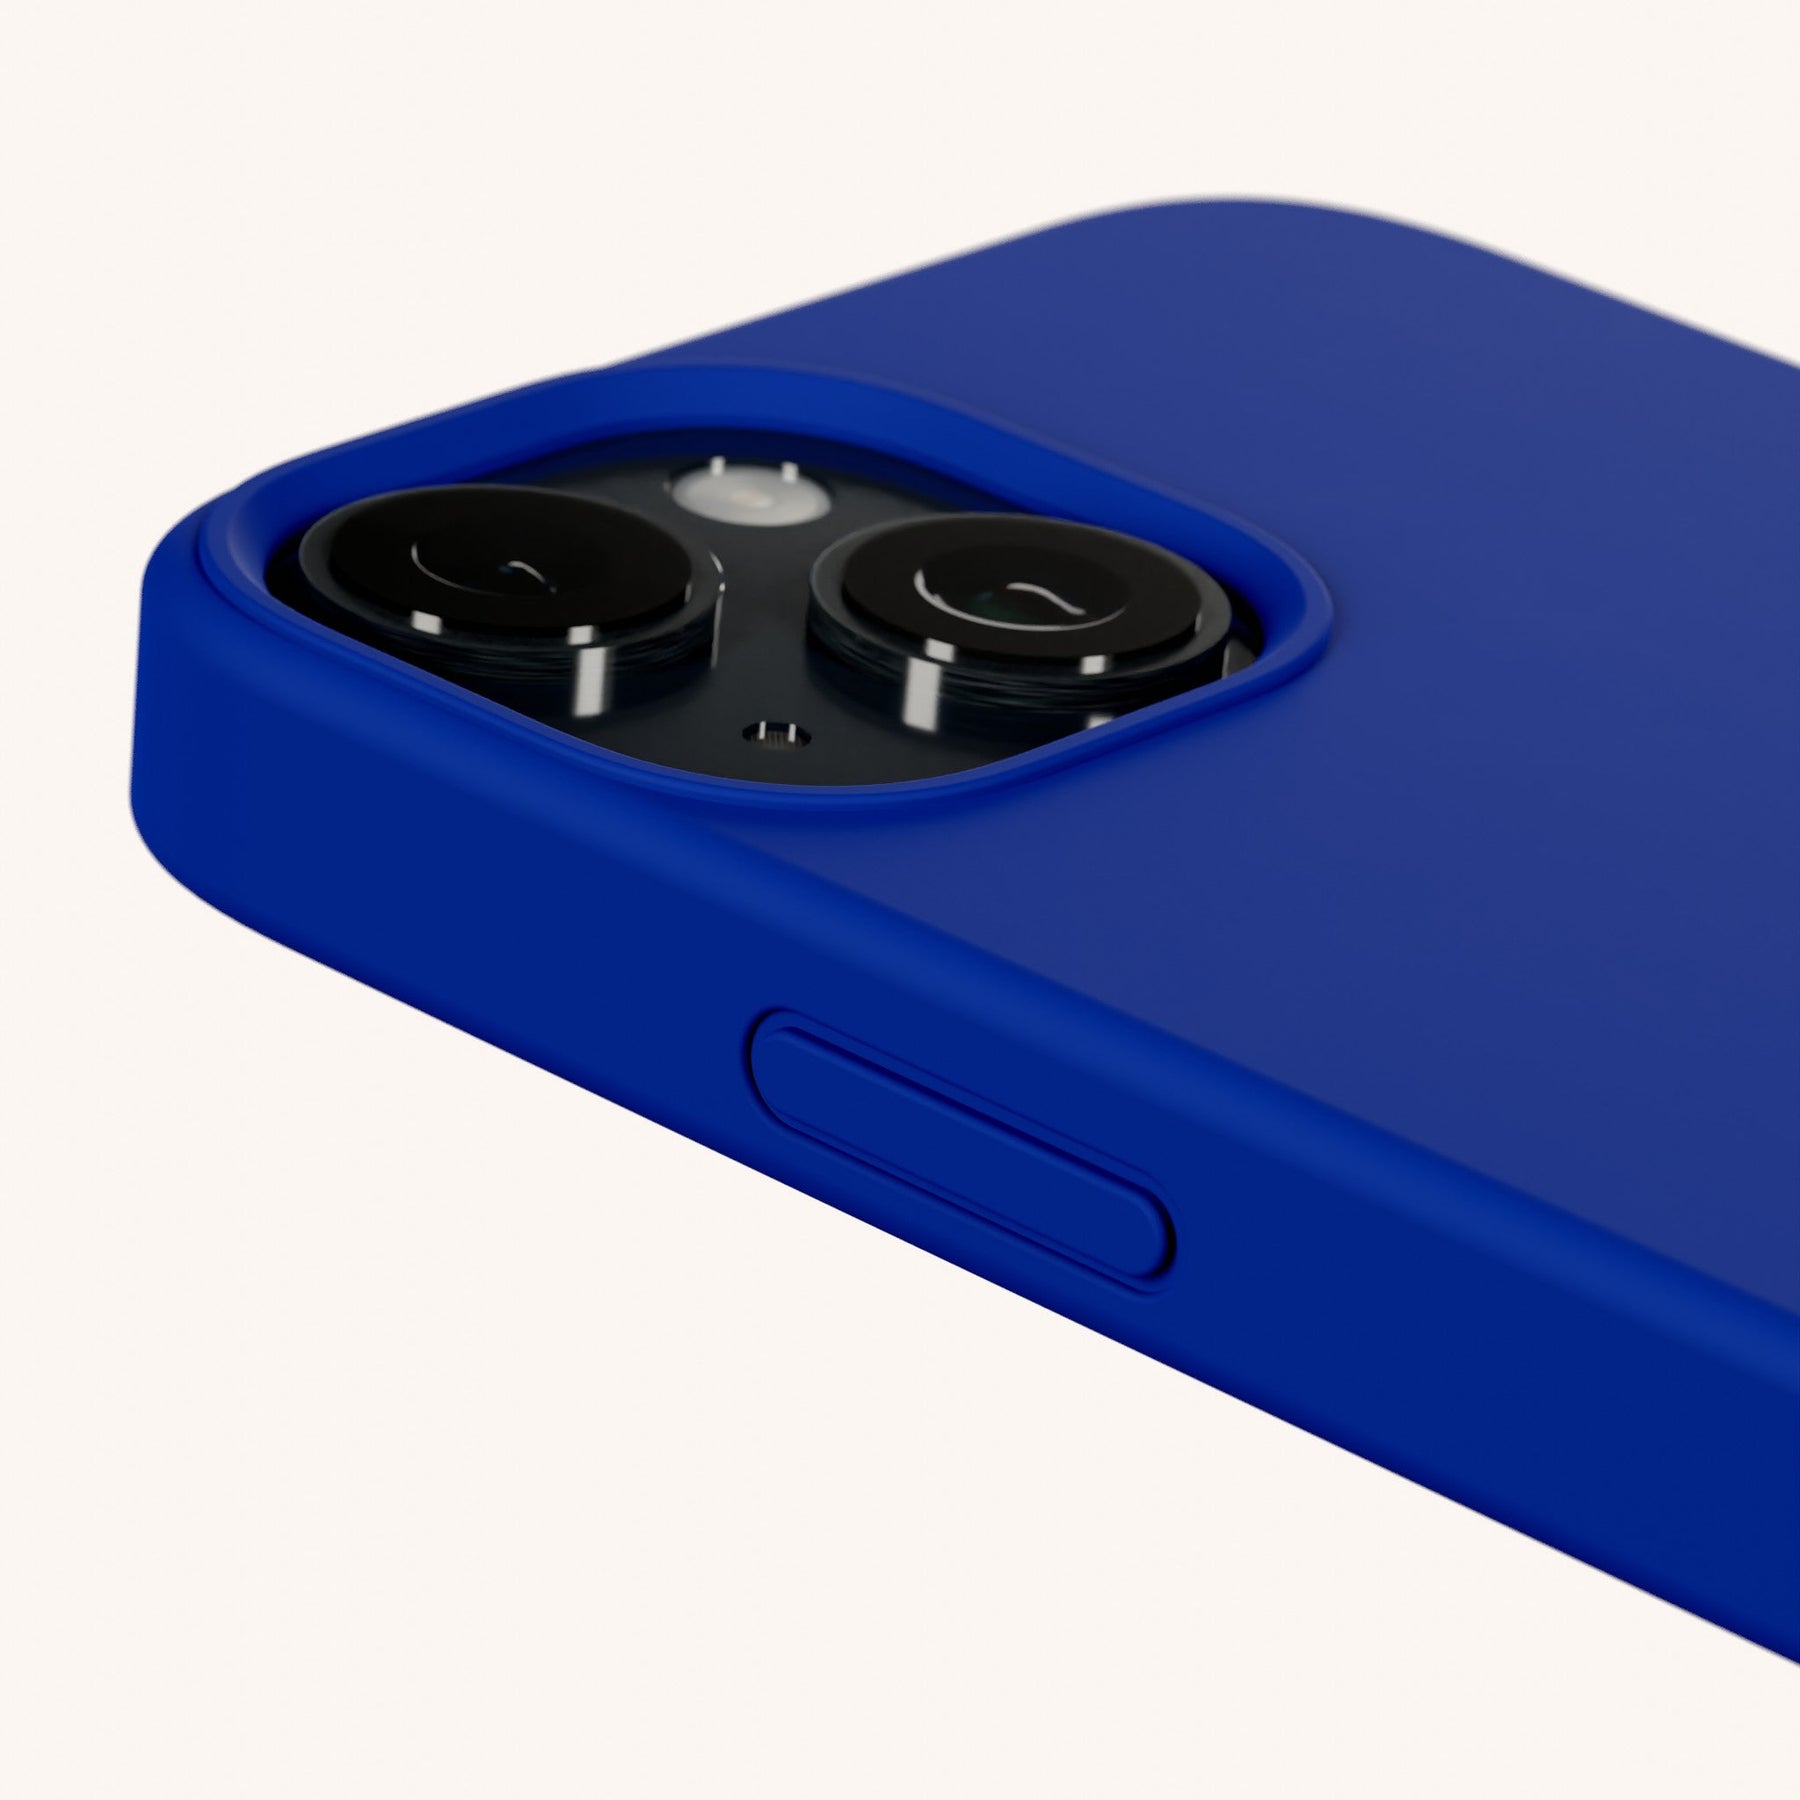 Phone Case with Eyelets in Blue